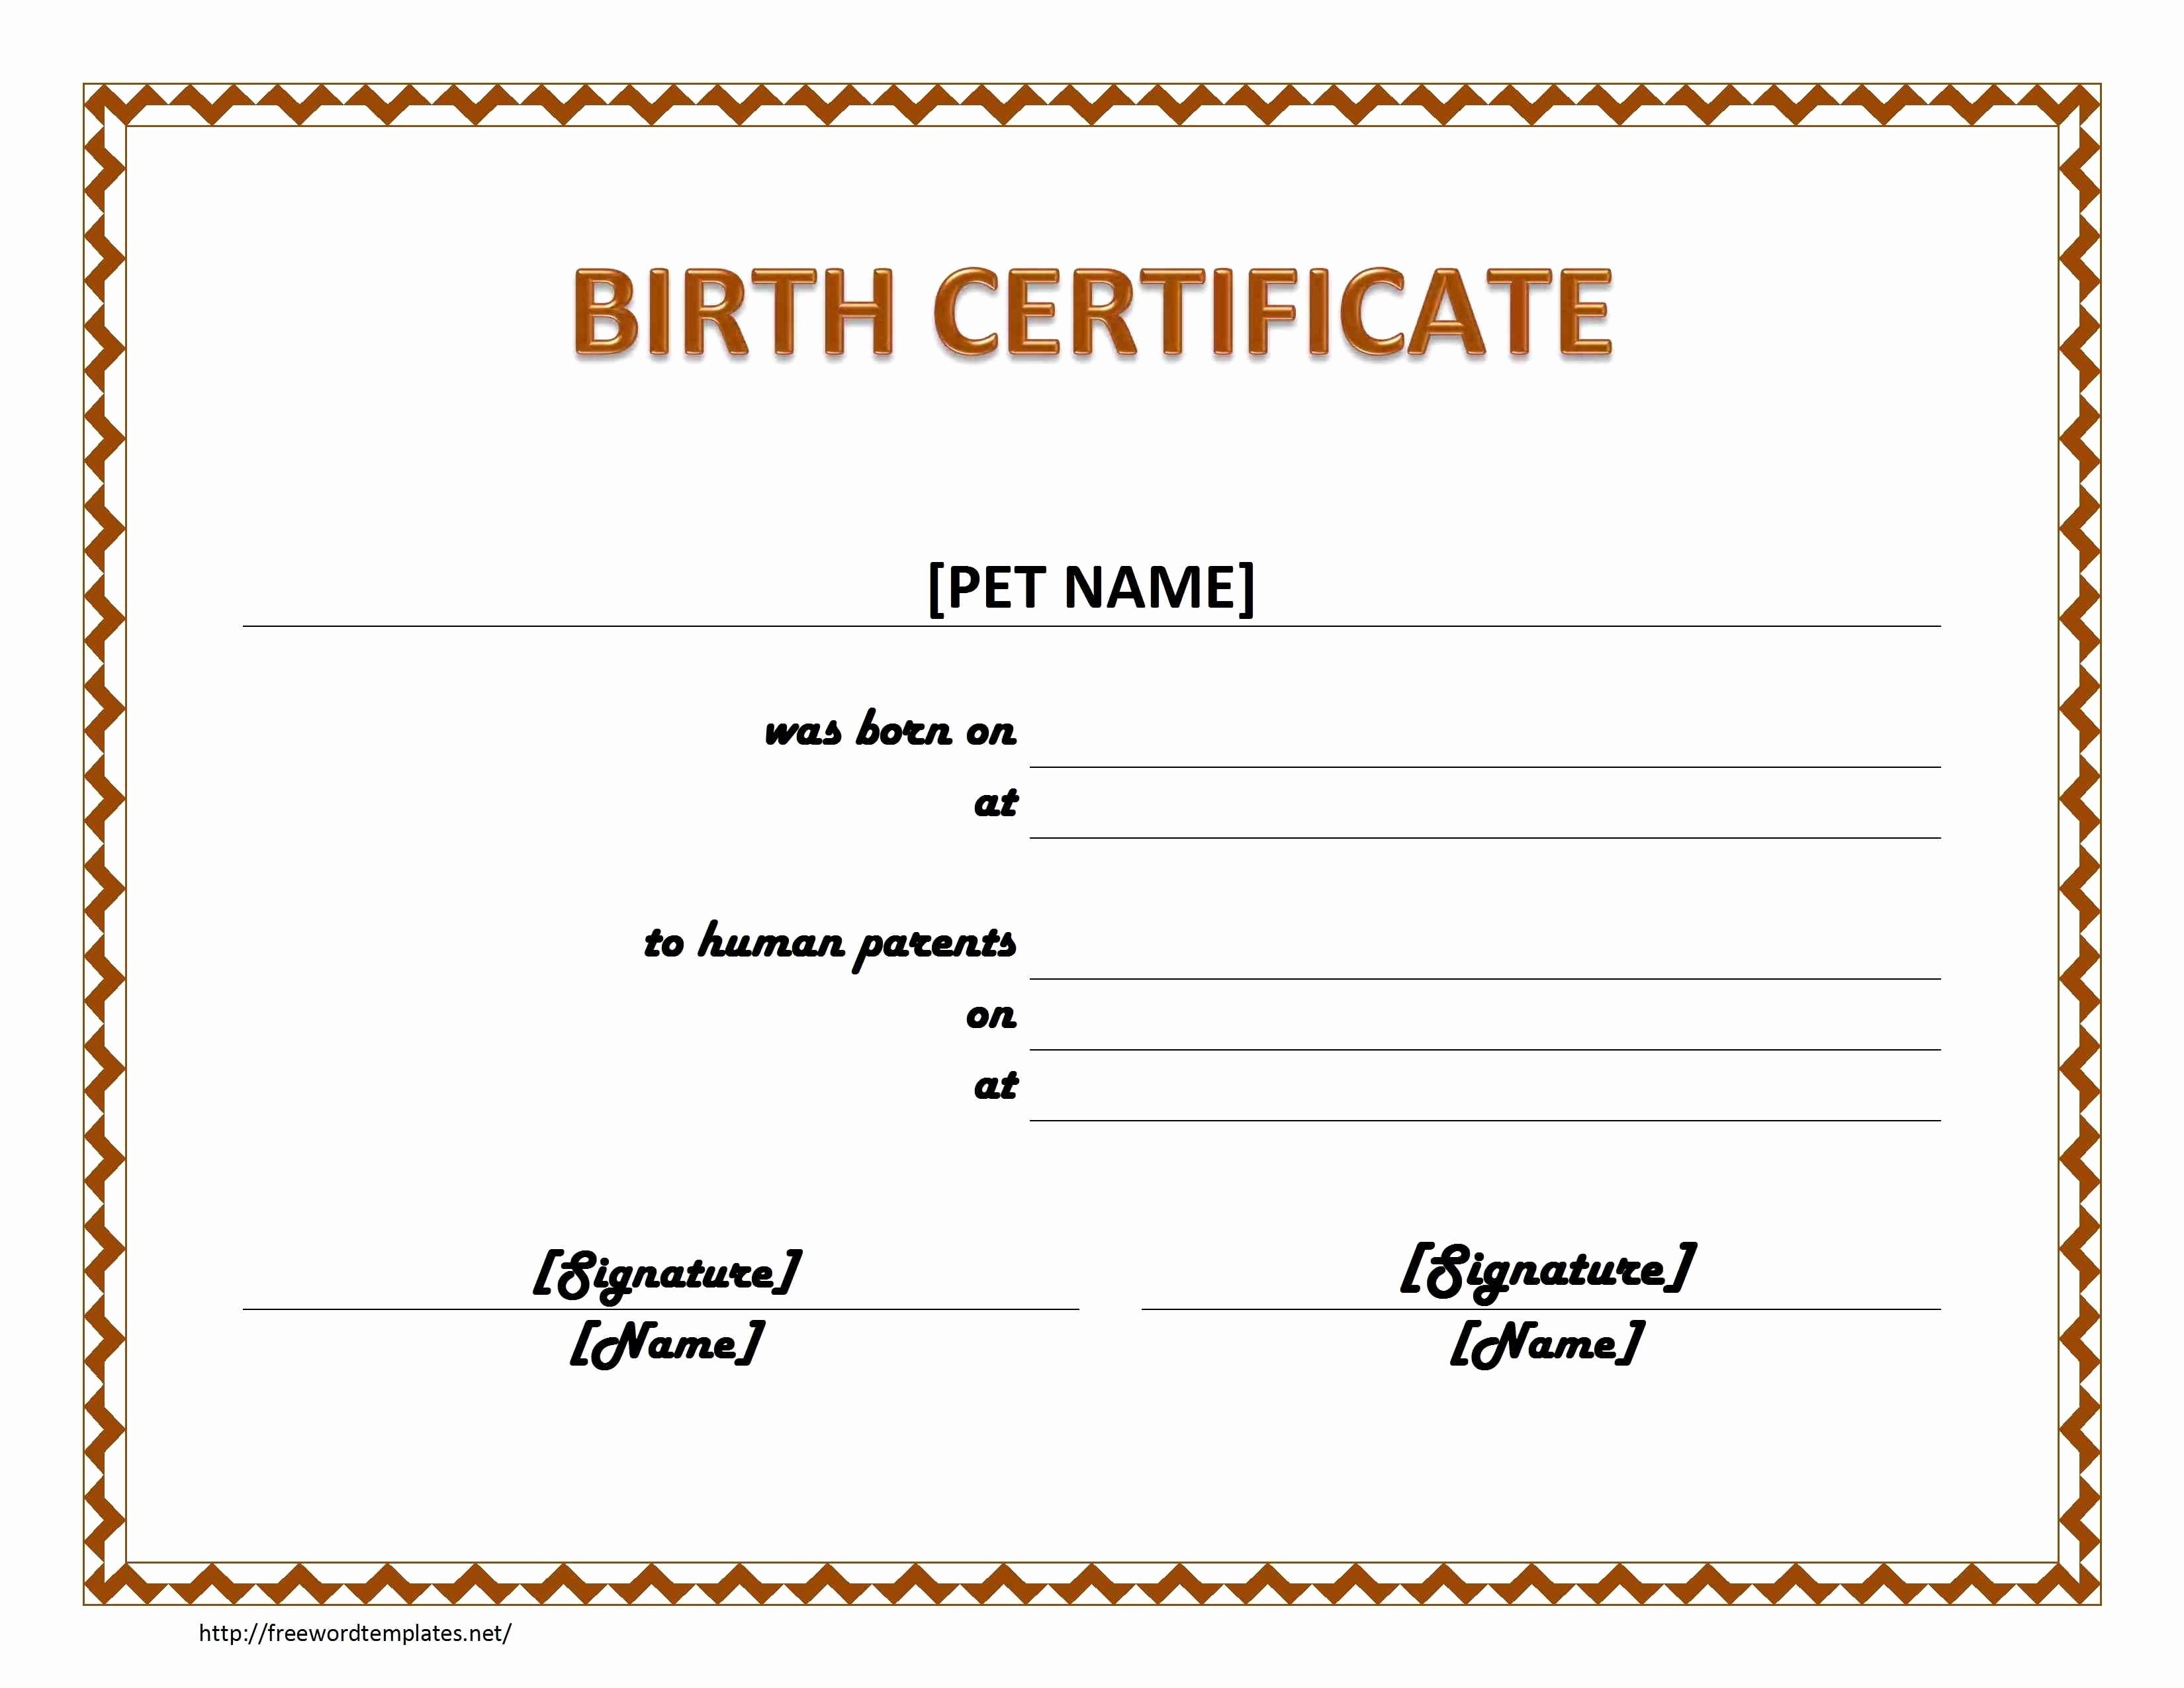 Official Birth Certificate Template New Ficial Birth Certificate Template Bamboodownunder